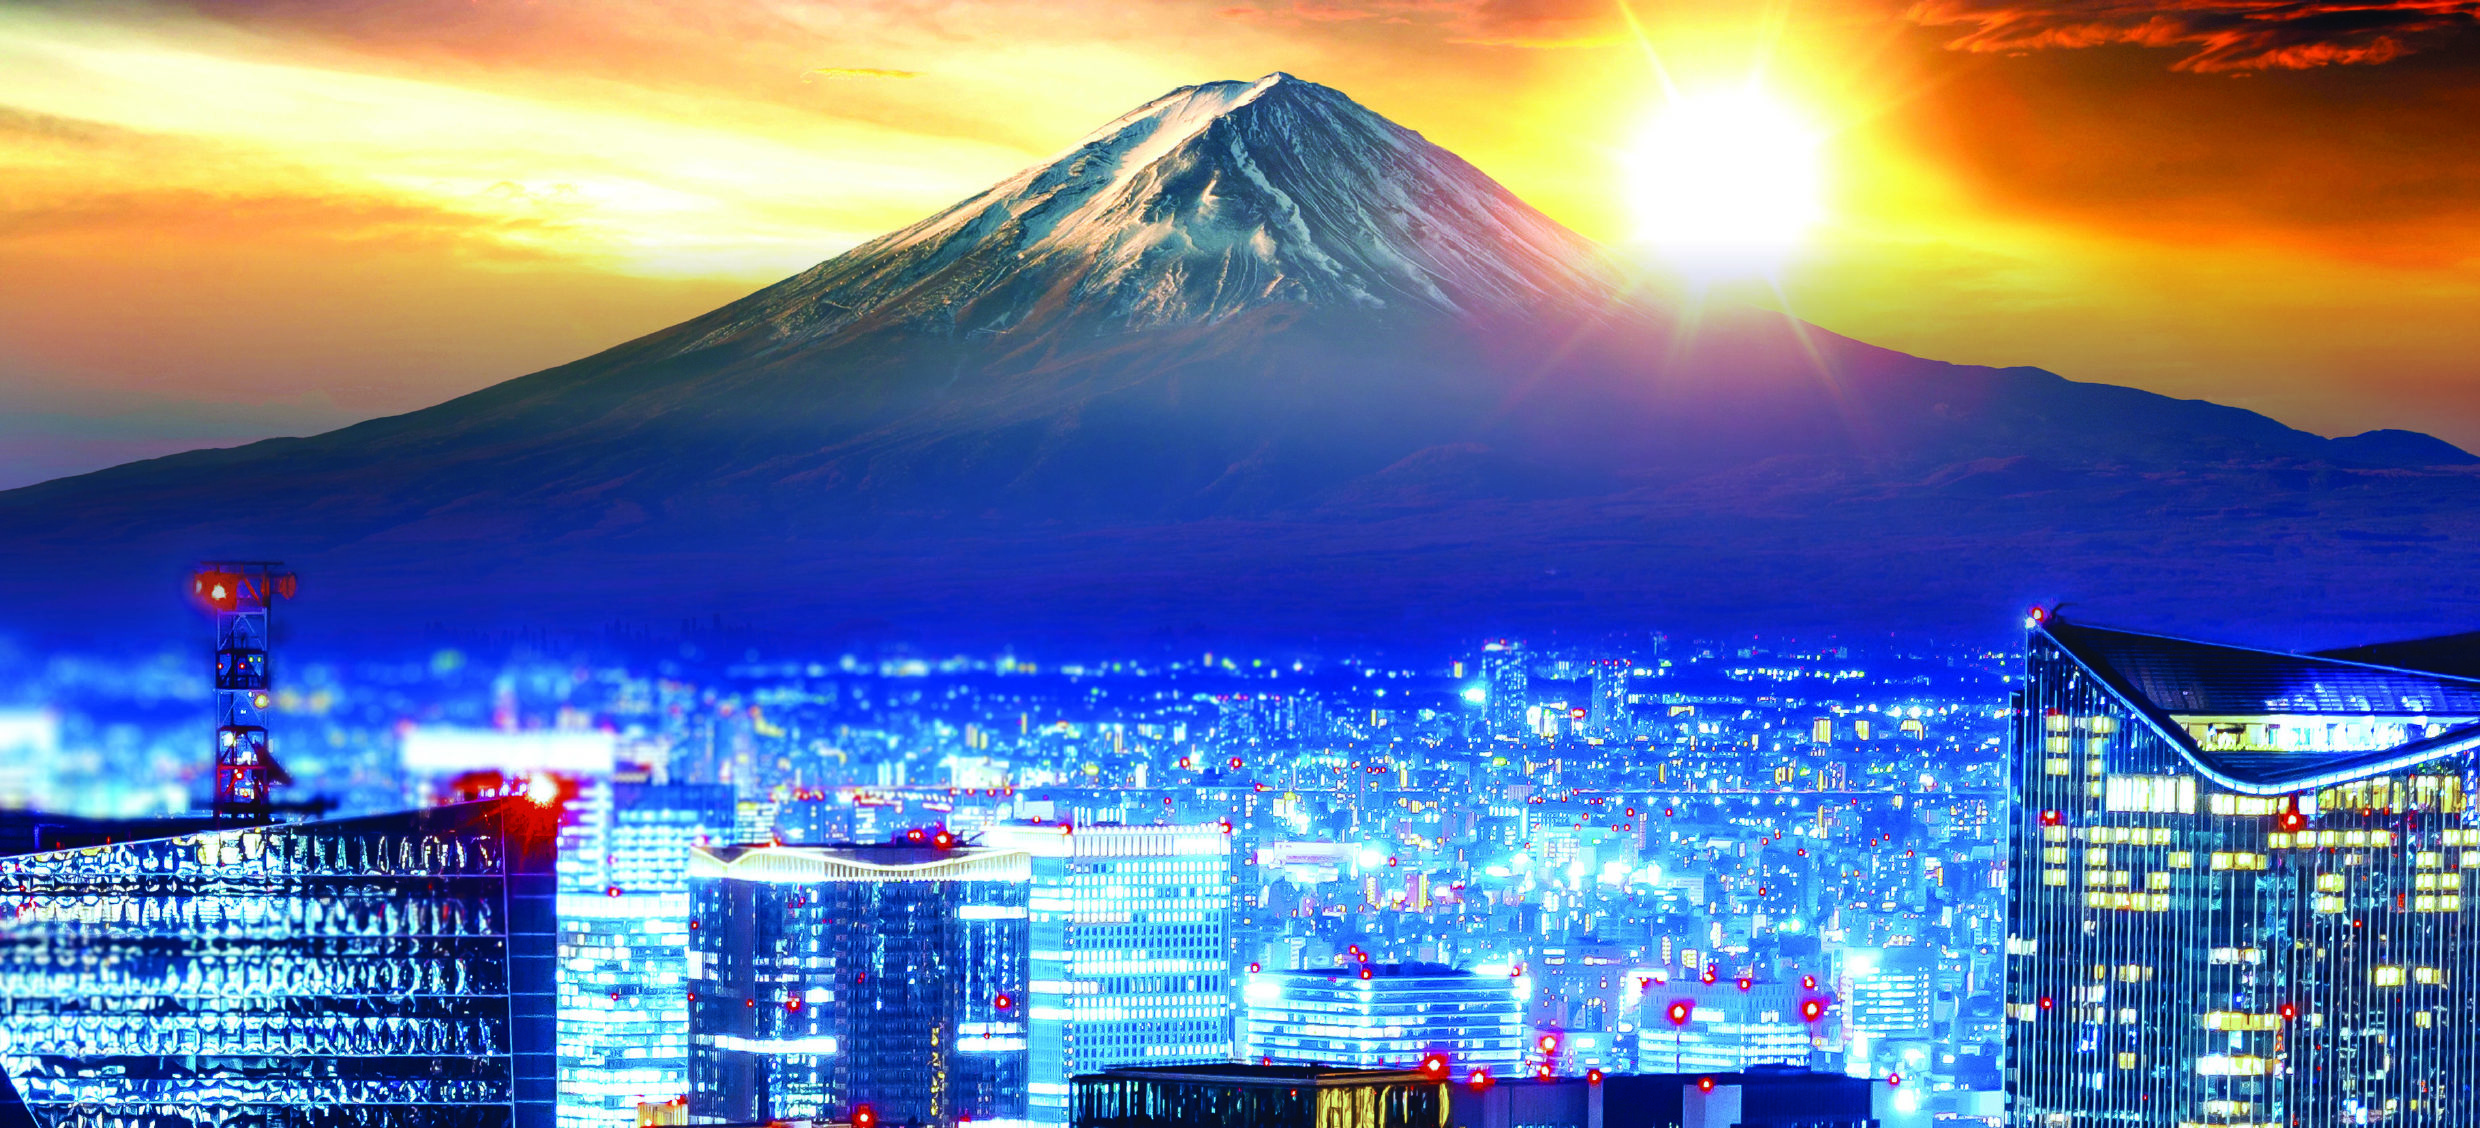 Tokyo city scape with Mt Fuji in the background